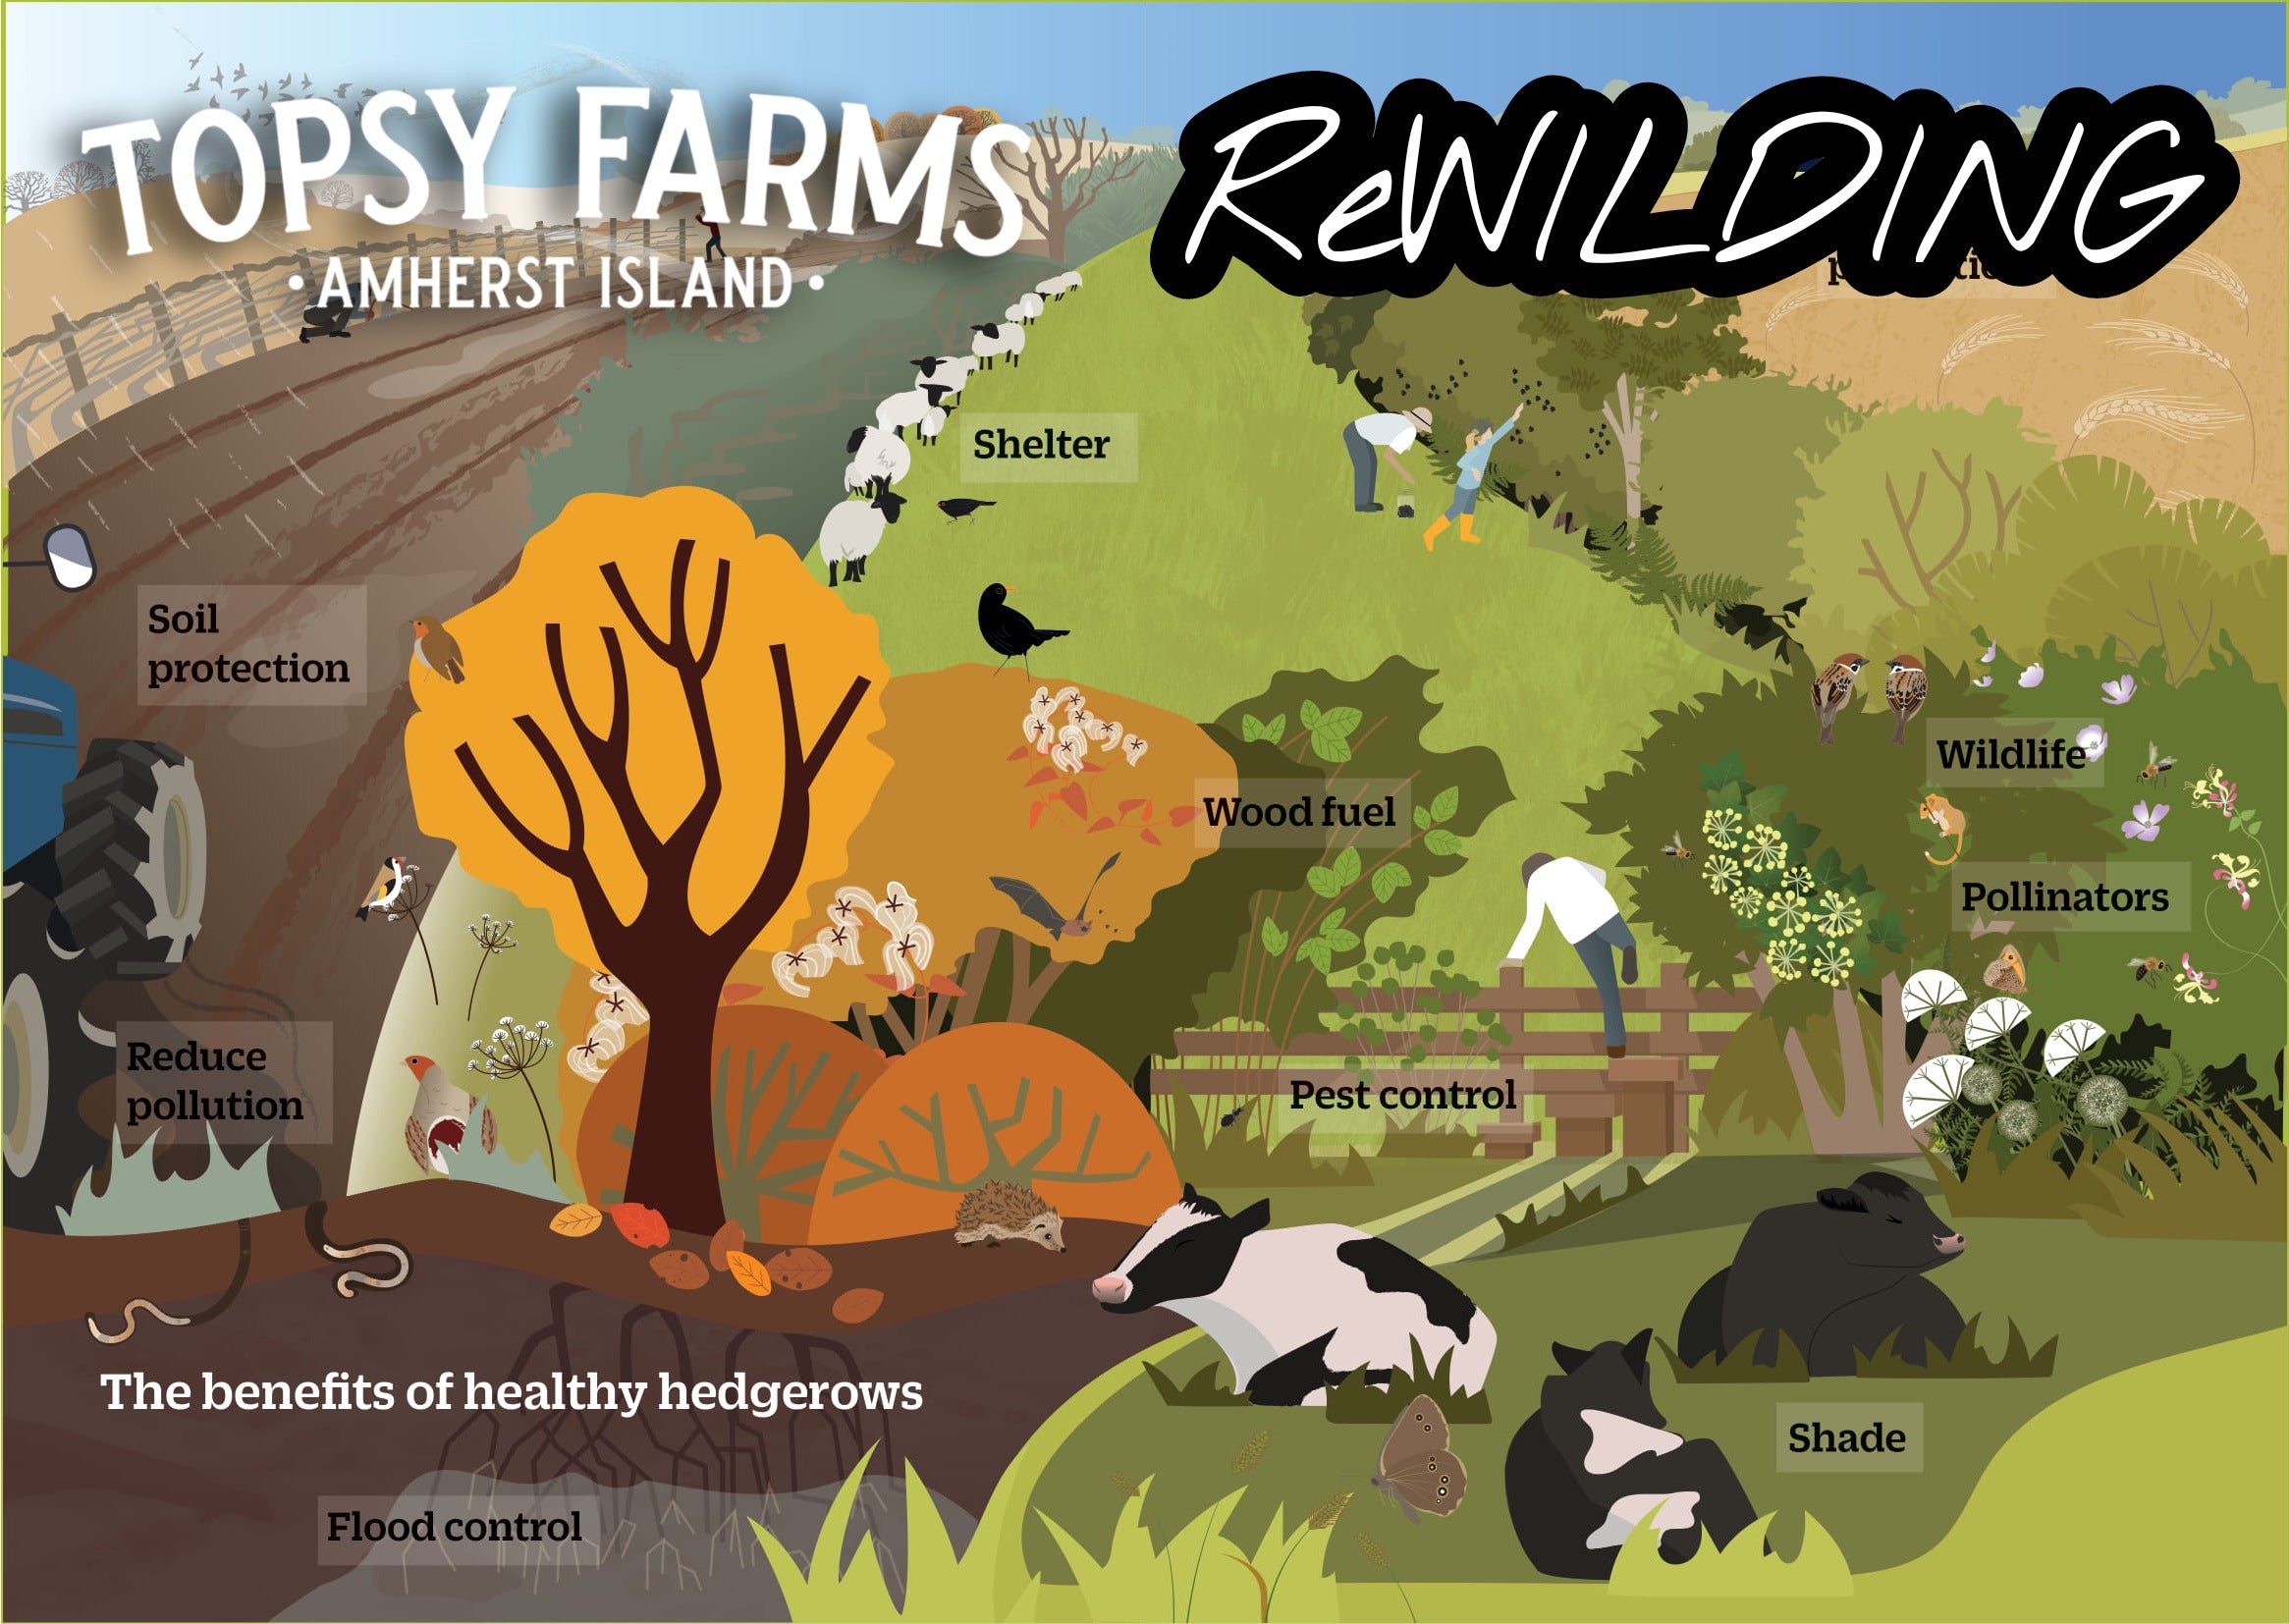 Topsy Farms' rewilding infographic, explaining the virtues of healthy hedgerows